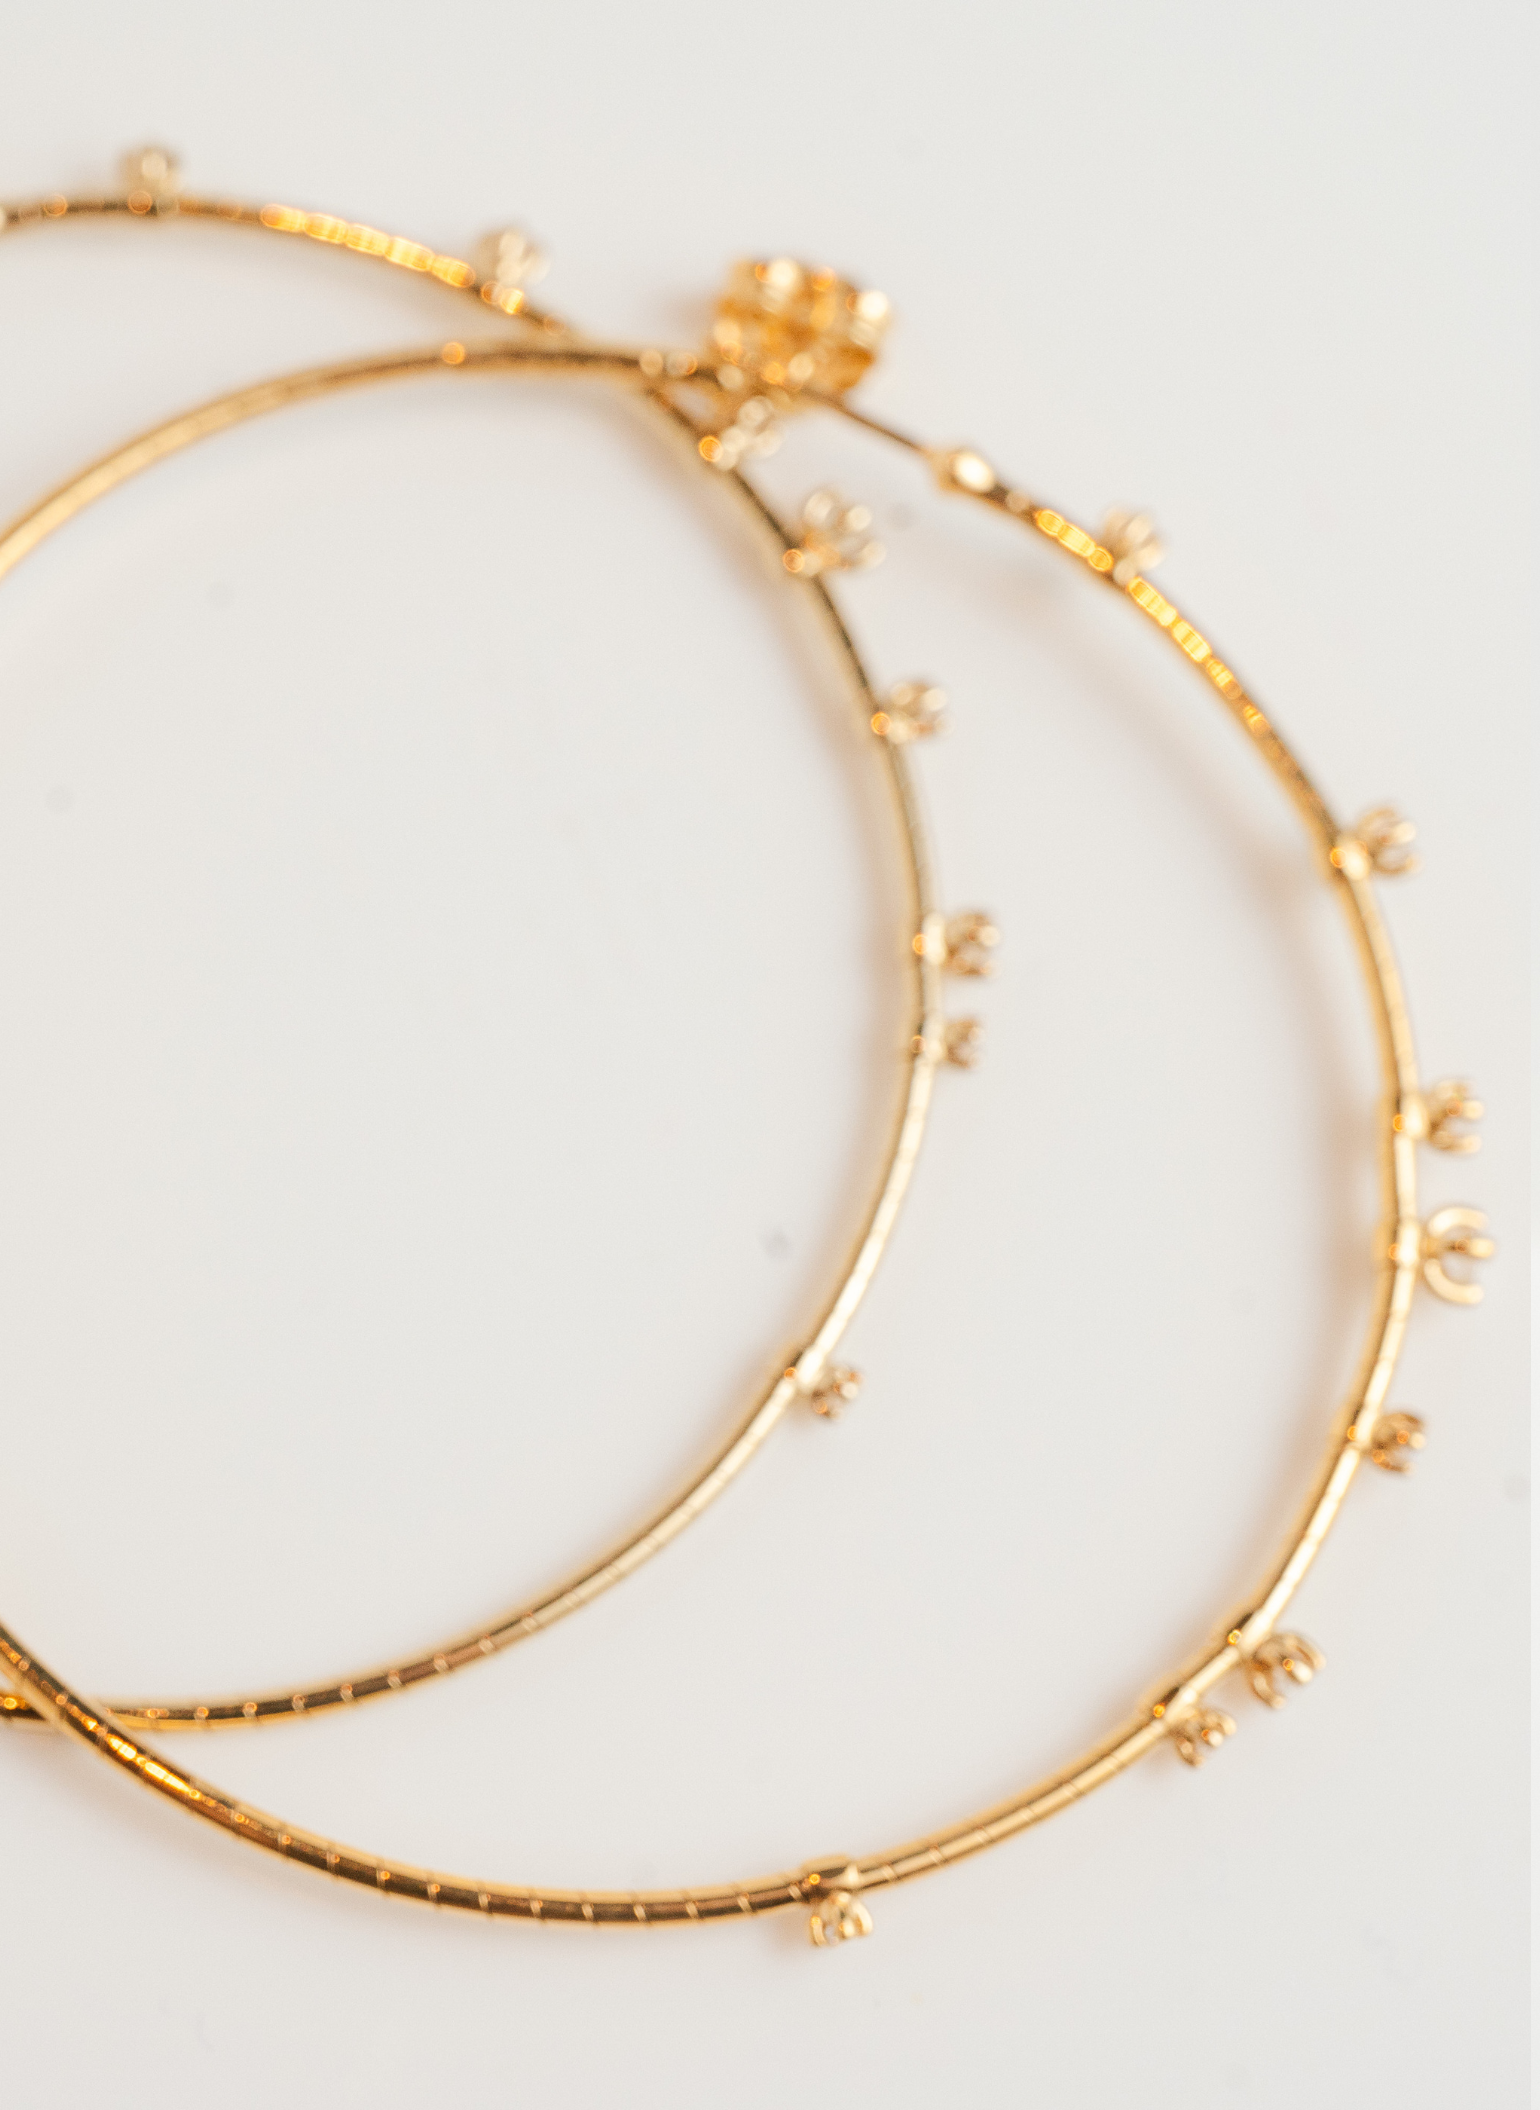 Yellow Gold and Diamond Hoops